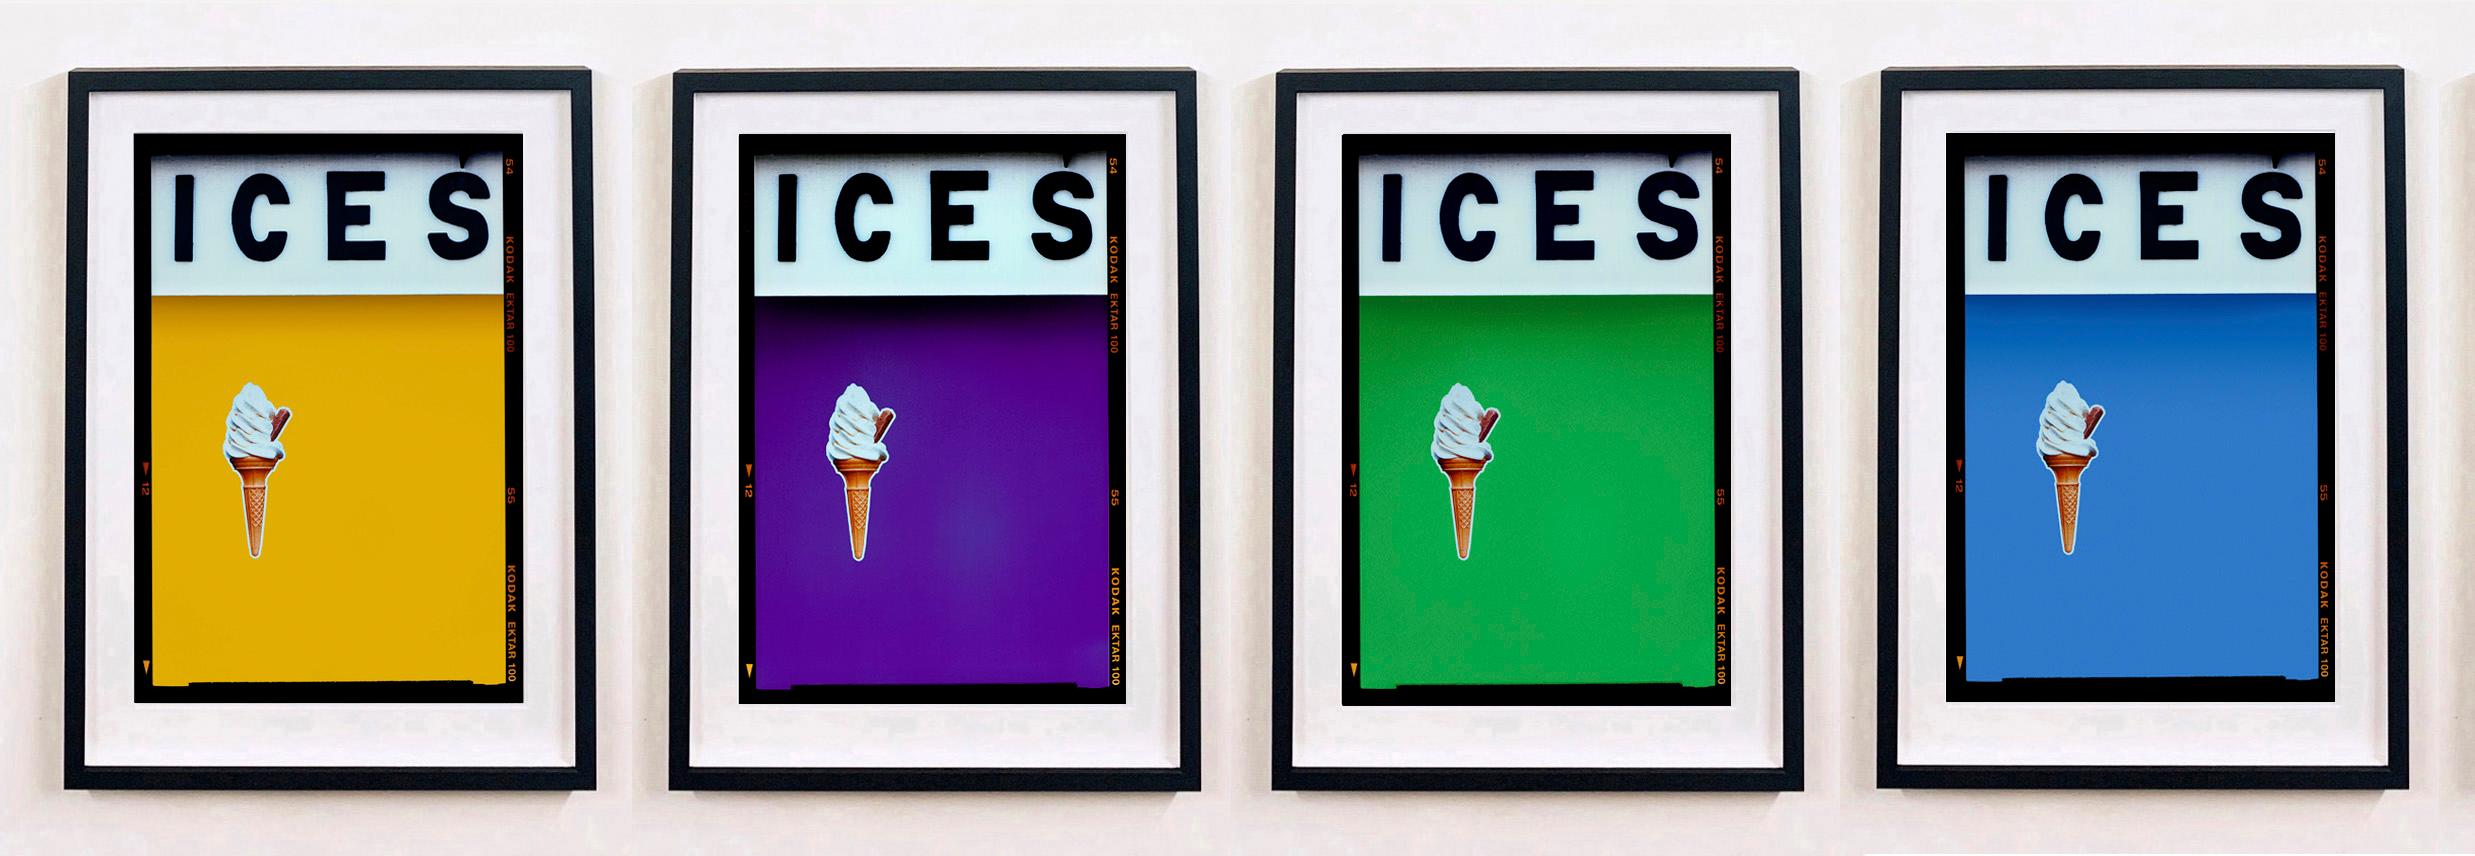 ICES Mustard Yellow, Purple, Green and Baby Blue, bold colour blocking pop art street photography from Richard Heeps series, On-Sea.
Created as an ode to childhood visits to grandparents living on the Sussex coast, the artwork tells the story of the